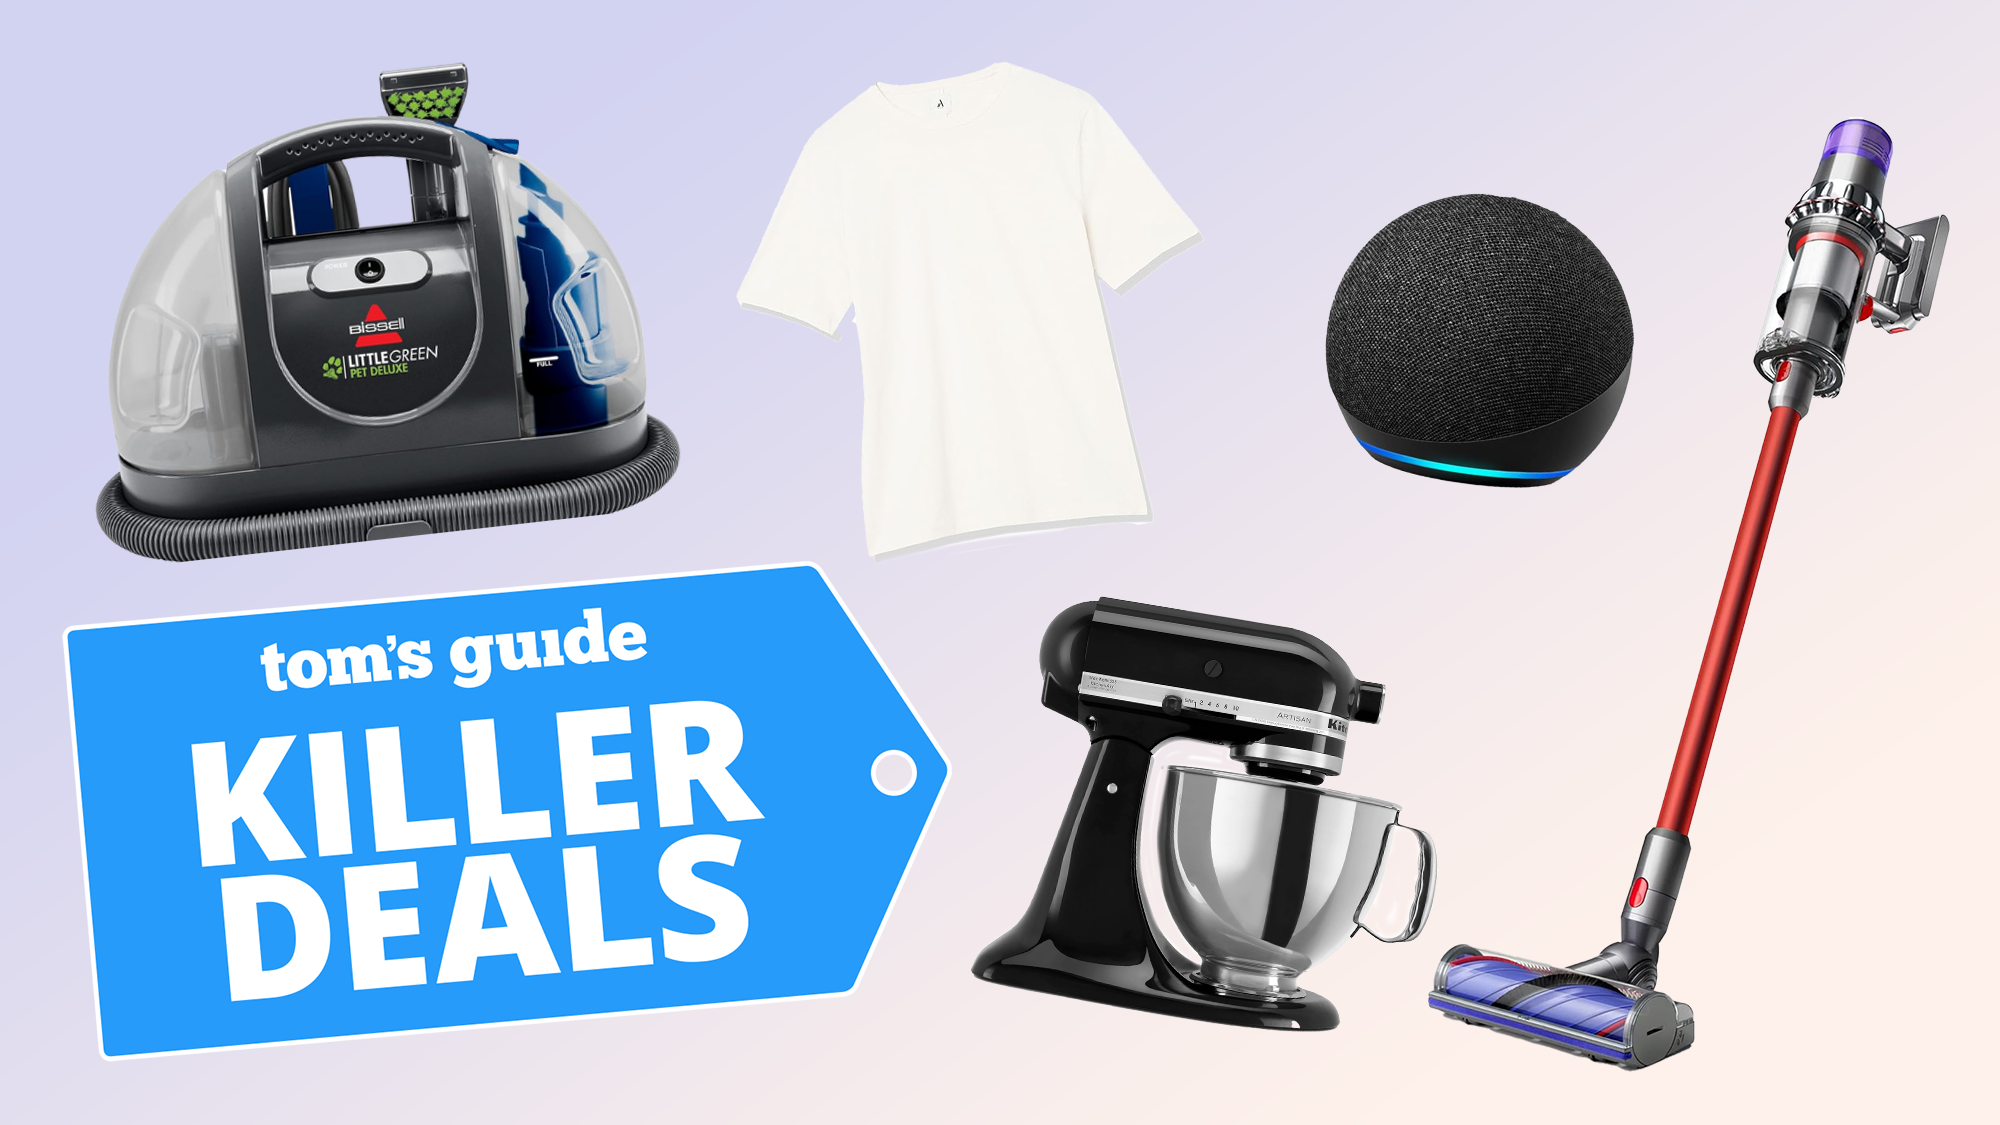 Massive Amazon weekend sale — deals on apparel, tech, and more from $6